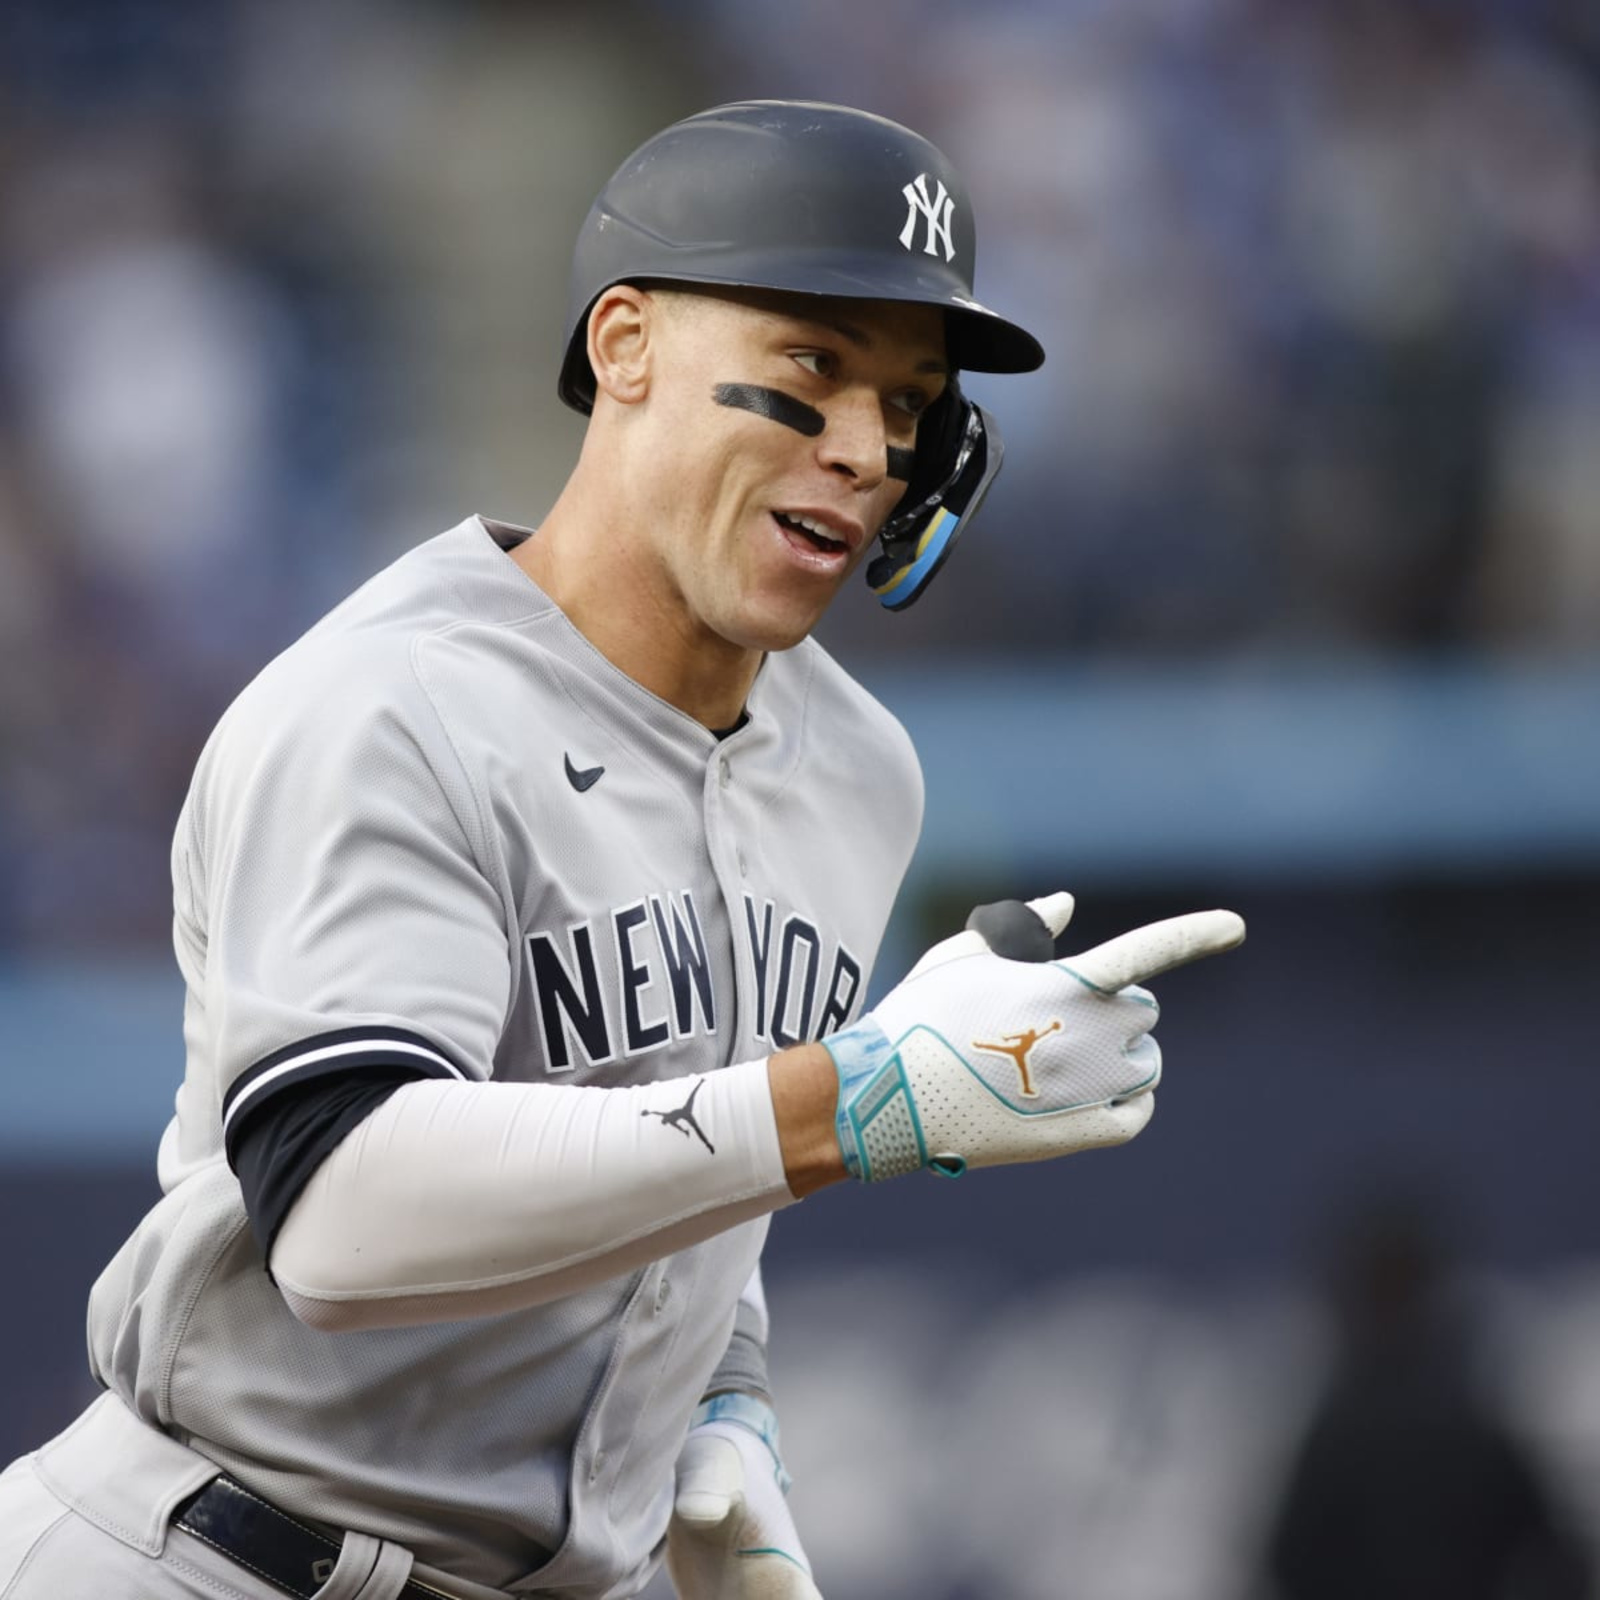 Blue Jays broadcasters sparked Aaron Judge controversy: 'Where is